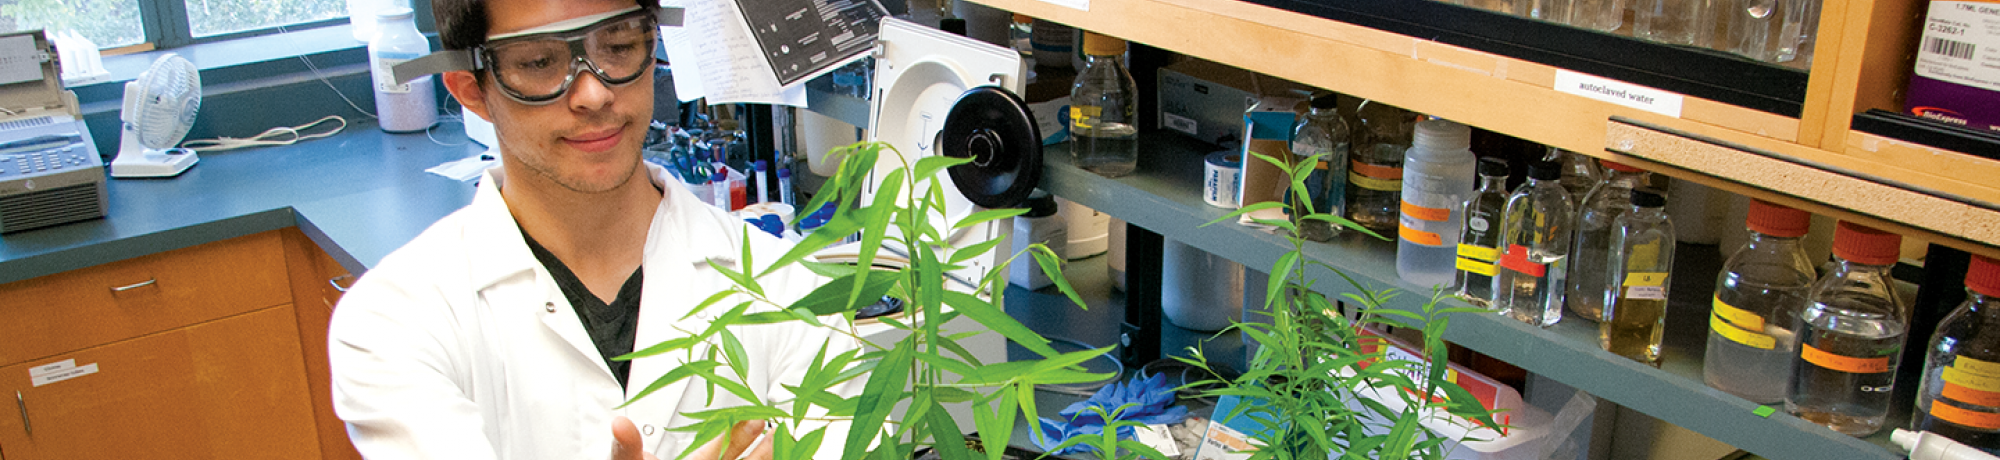 Student growing plants in a lab